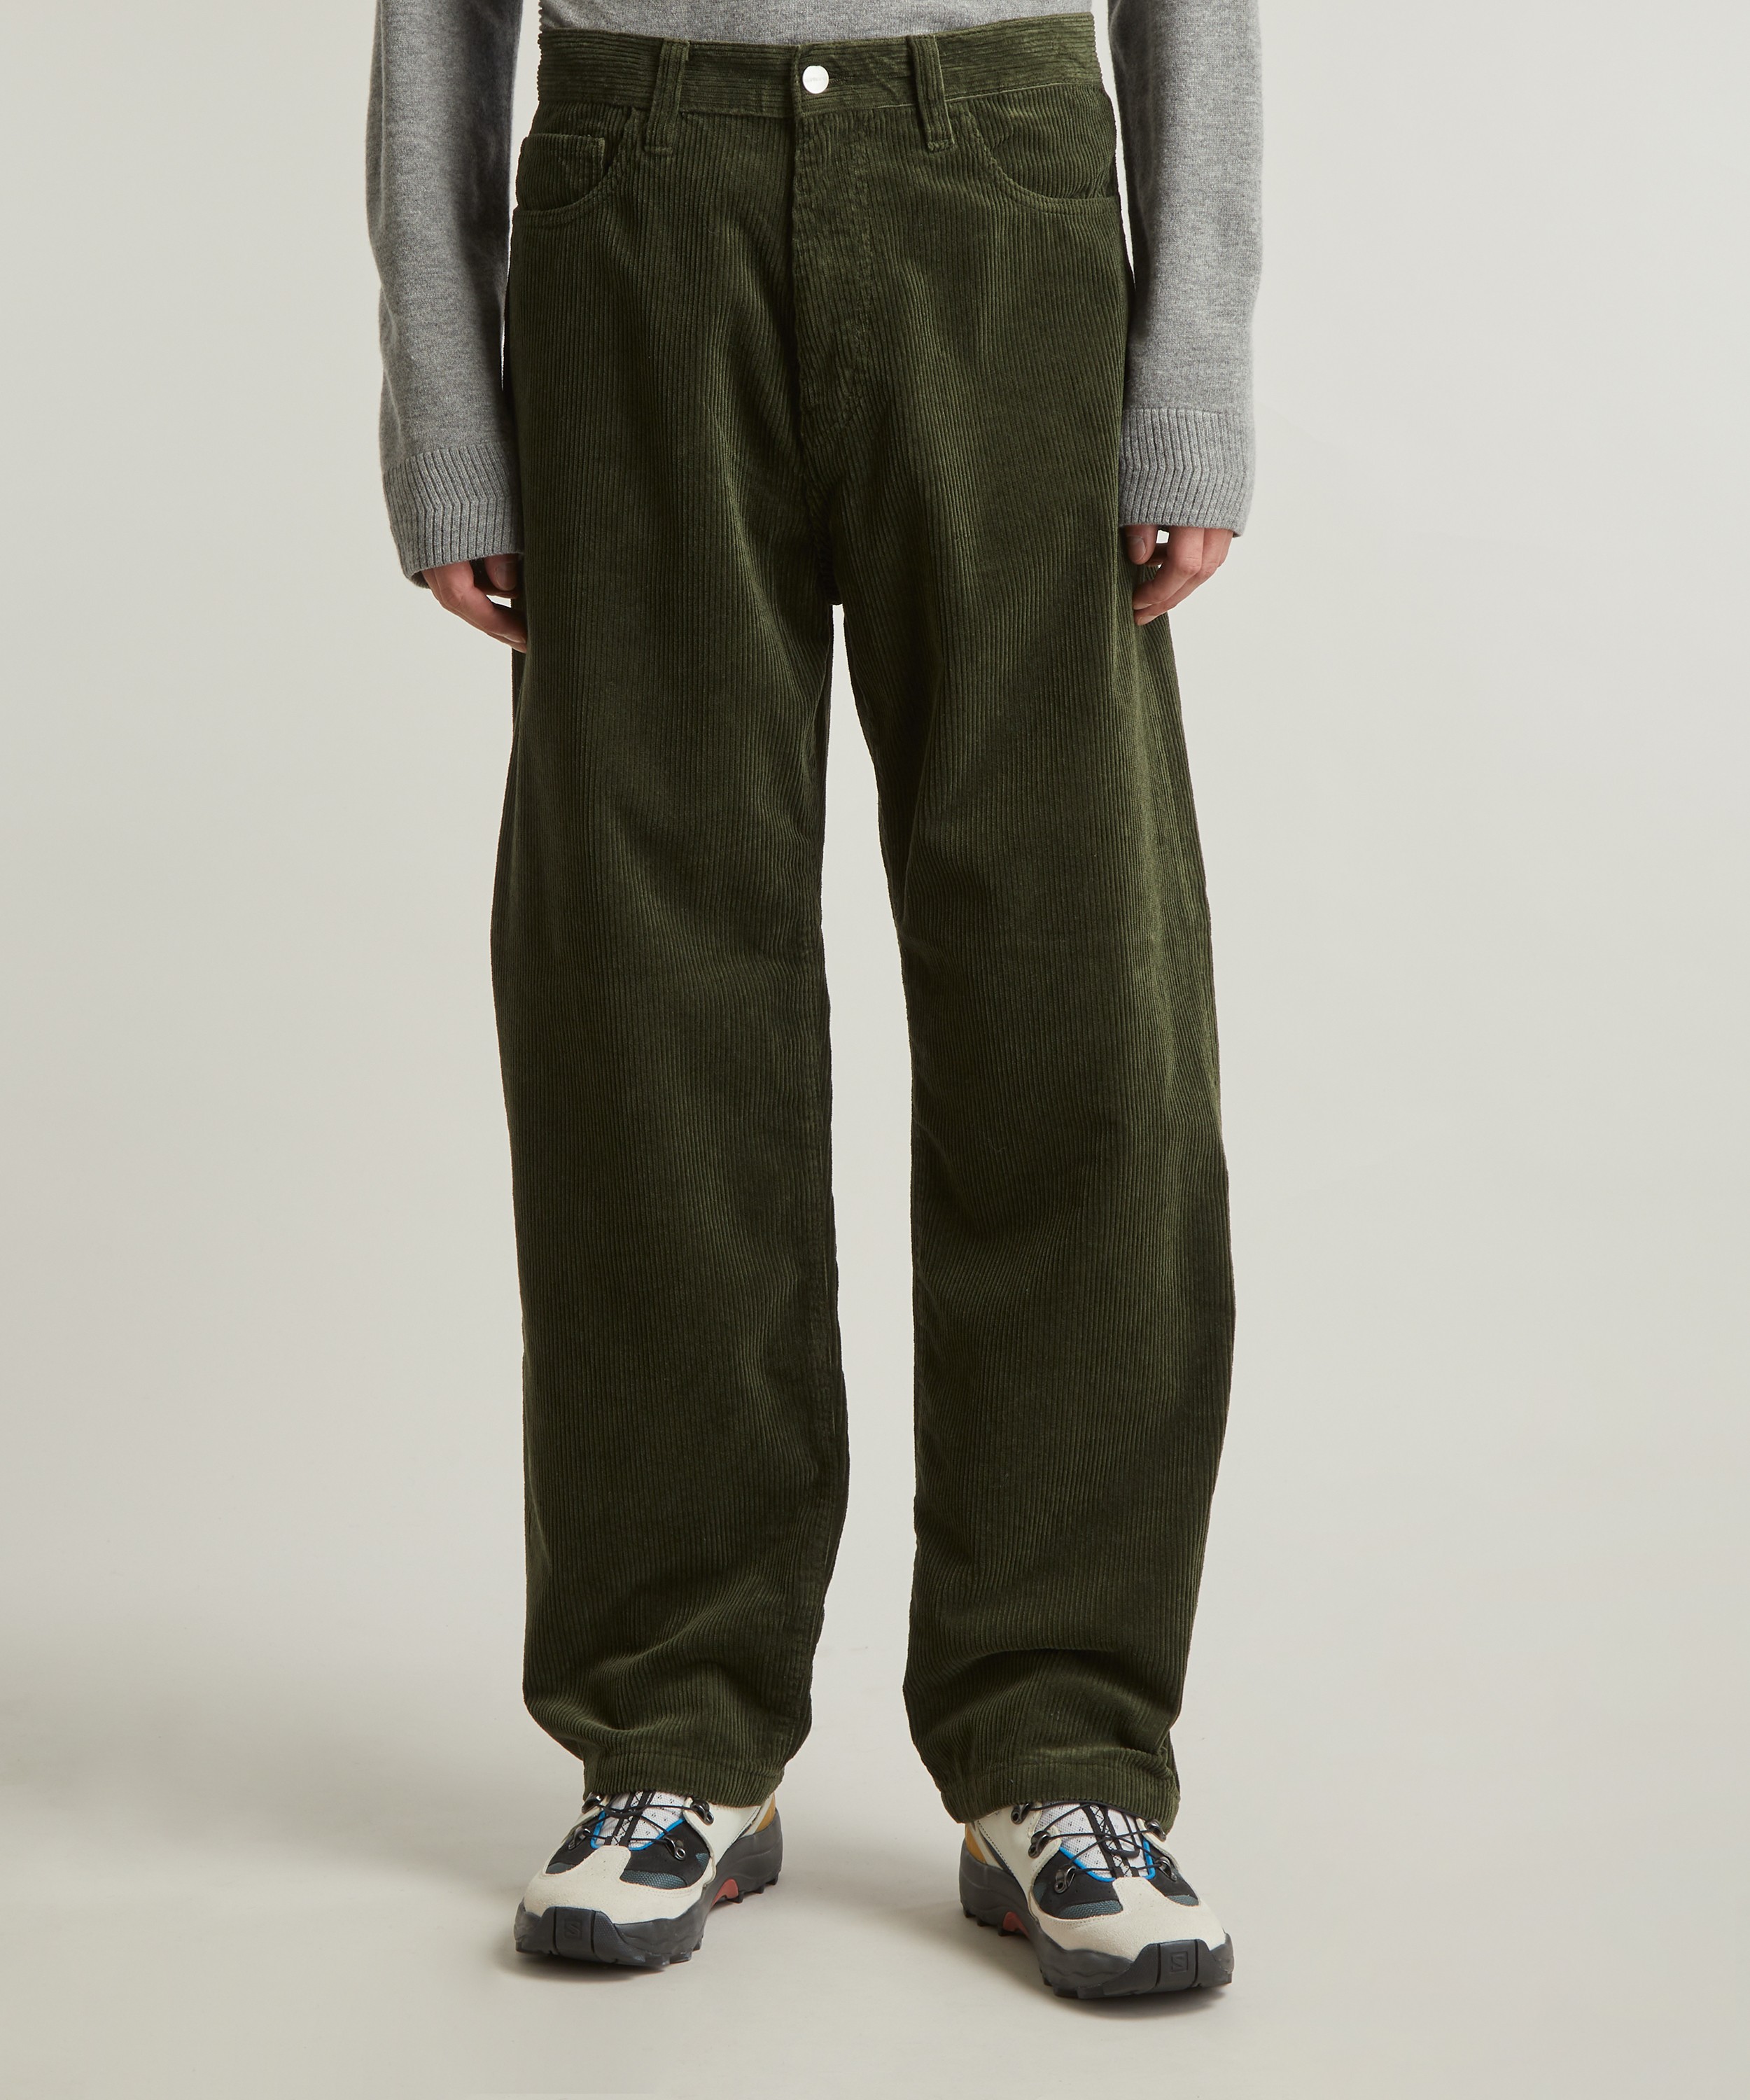 Carhartt Landon Pant (5 stores) see best prices now »